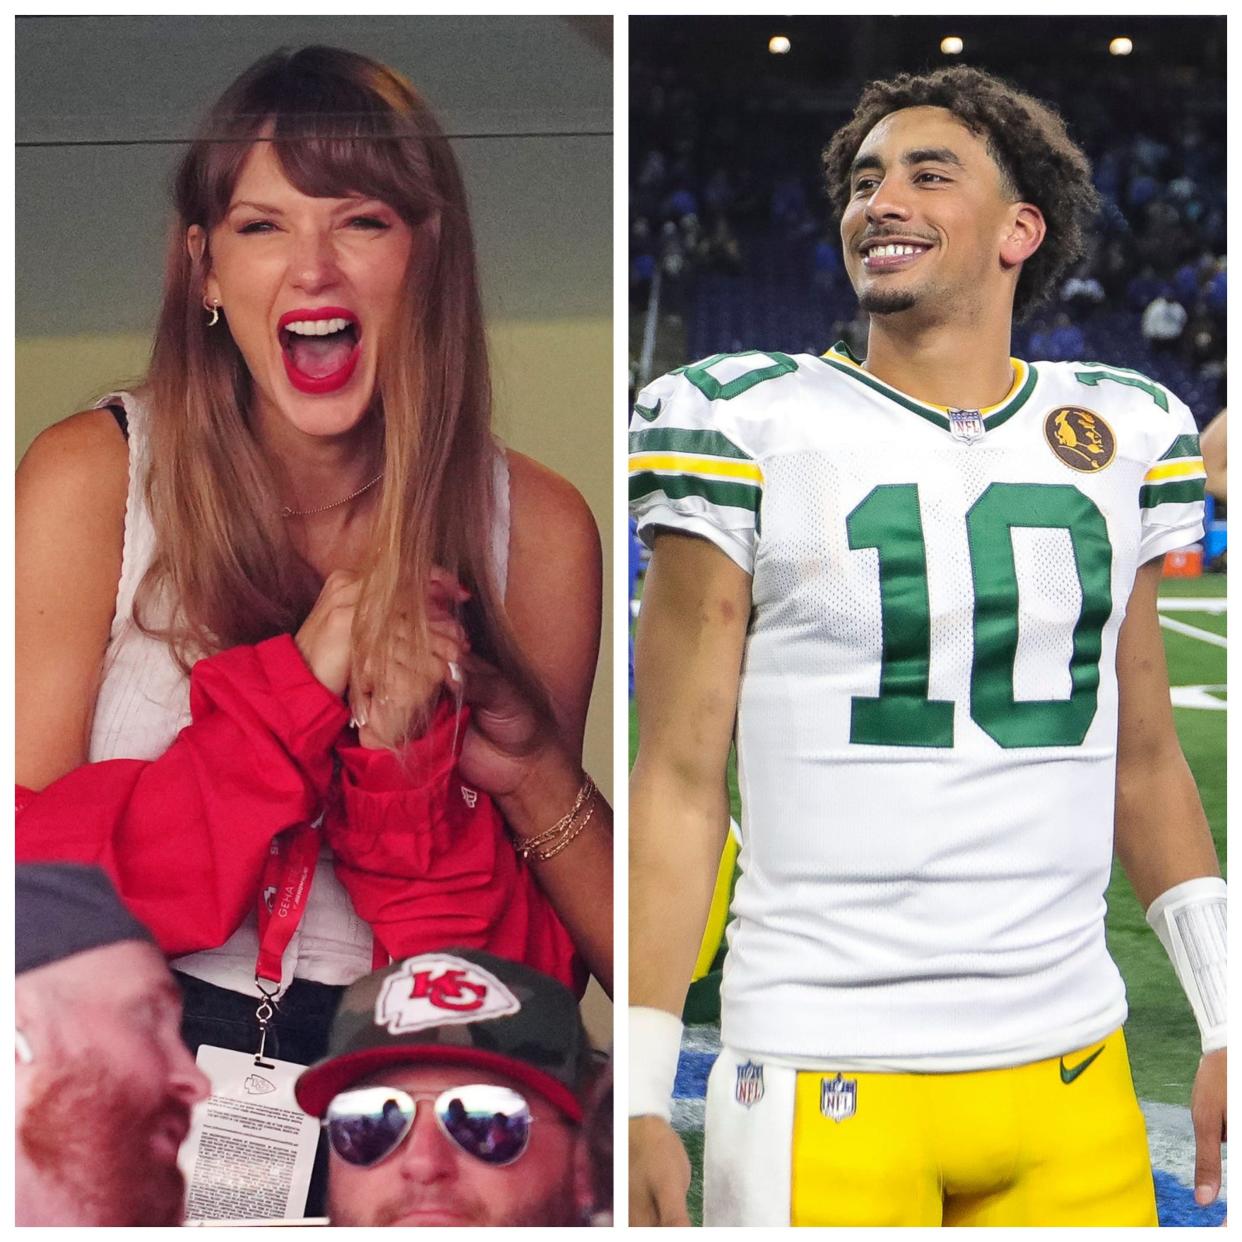 Taylor Swift, who is in a relationship with Kansas City Chiefs star tight end Travis Kelce, could be in attendance for the Green Bay Packers' game on Sunday when the two teams square off. Packers quarterback Jordan Love said he doesn't listen to too much Taylor Swift.